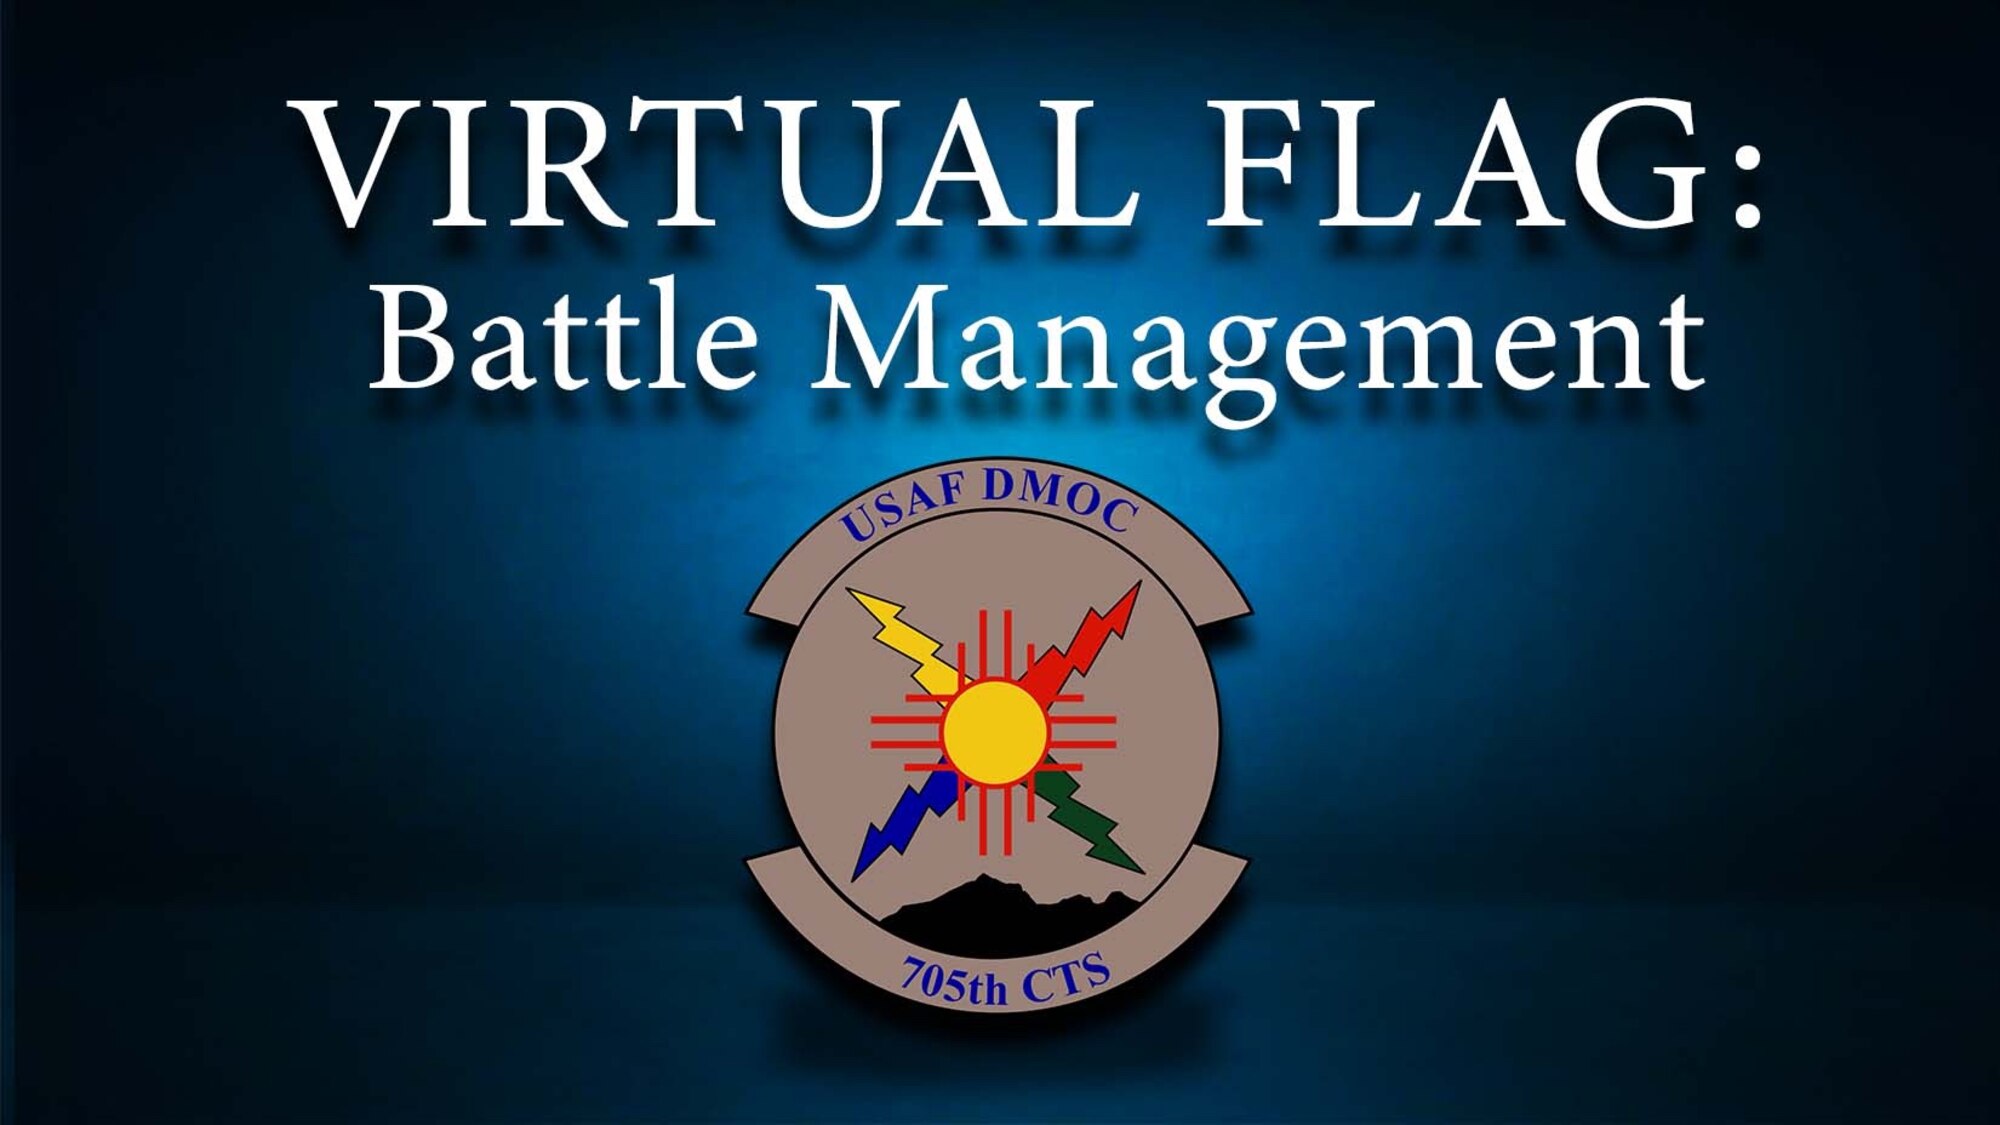 graphic VIRTUAL FLAG: Battle Management exercise title on blue background with USAF 705th Combat Training Squadron emblem below title.